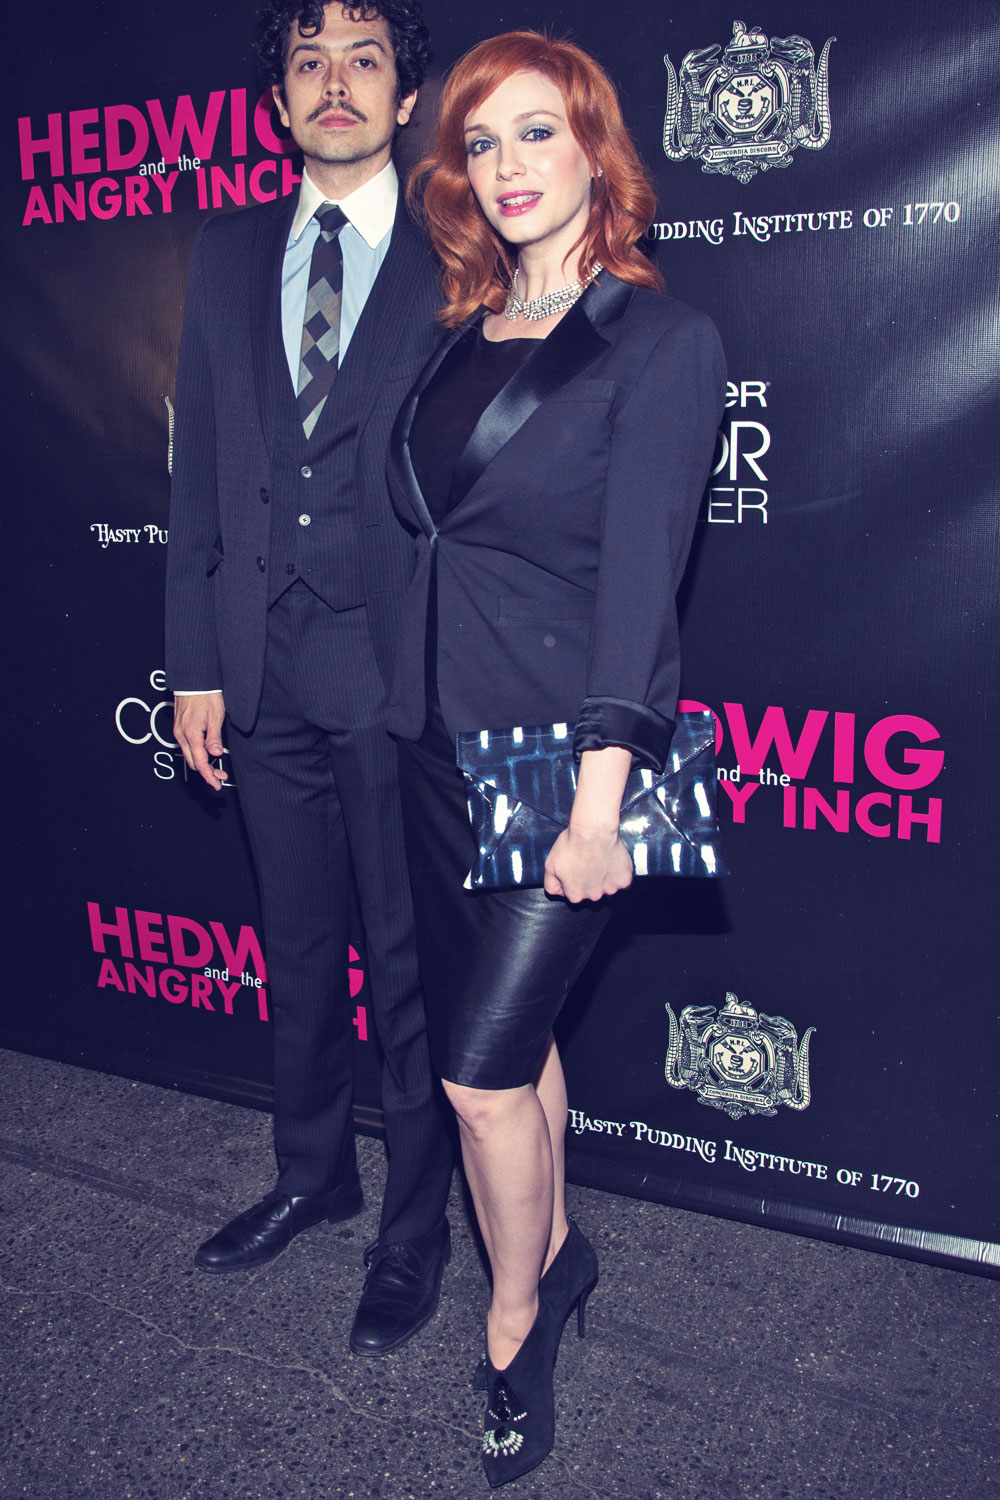 Christina Hendricks attends Hedwig And The Angry Inch